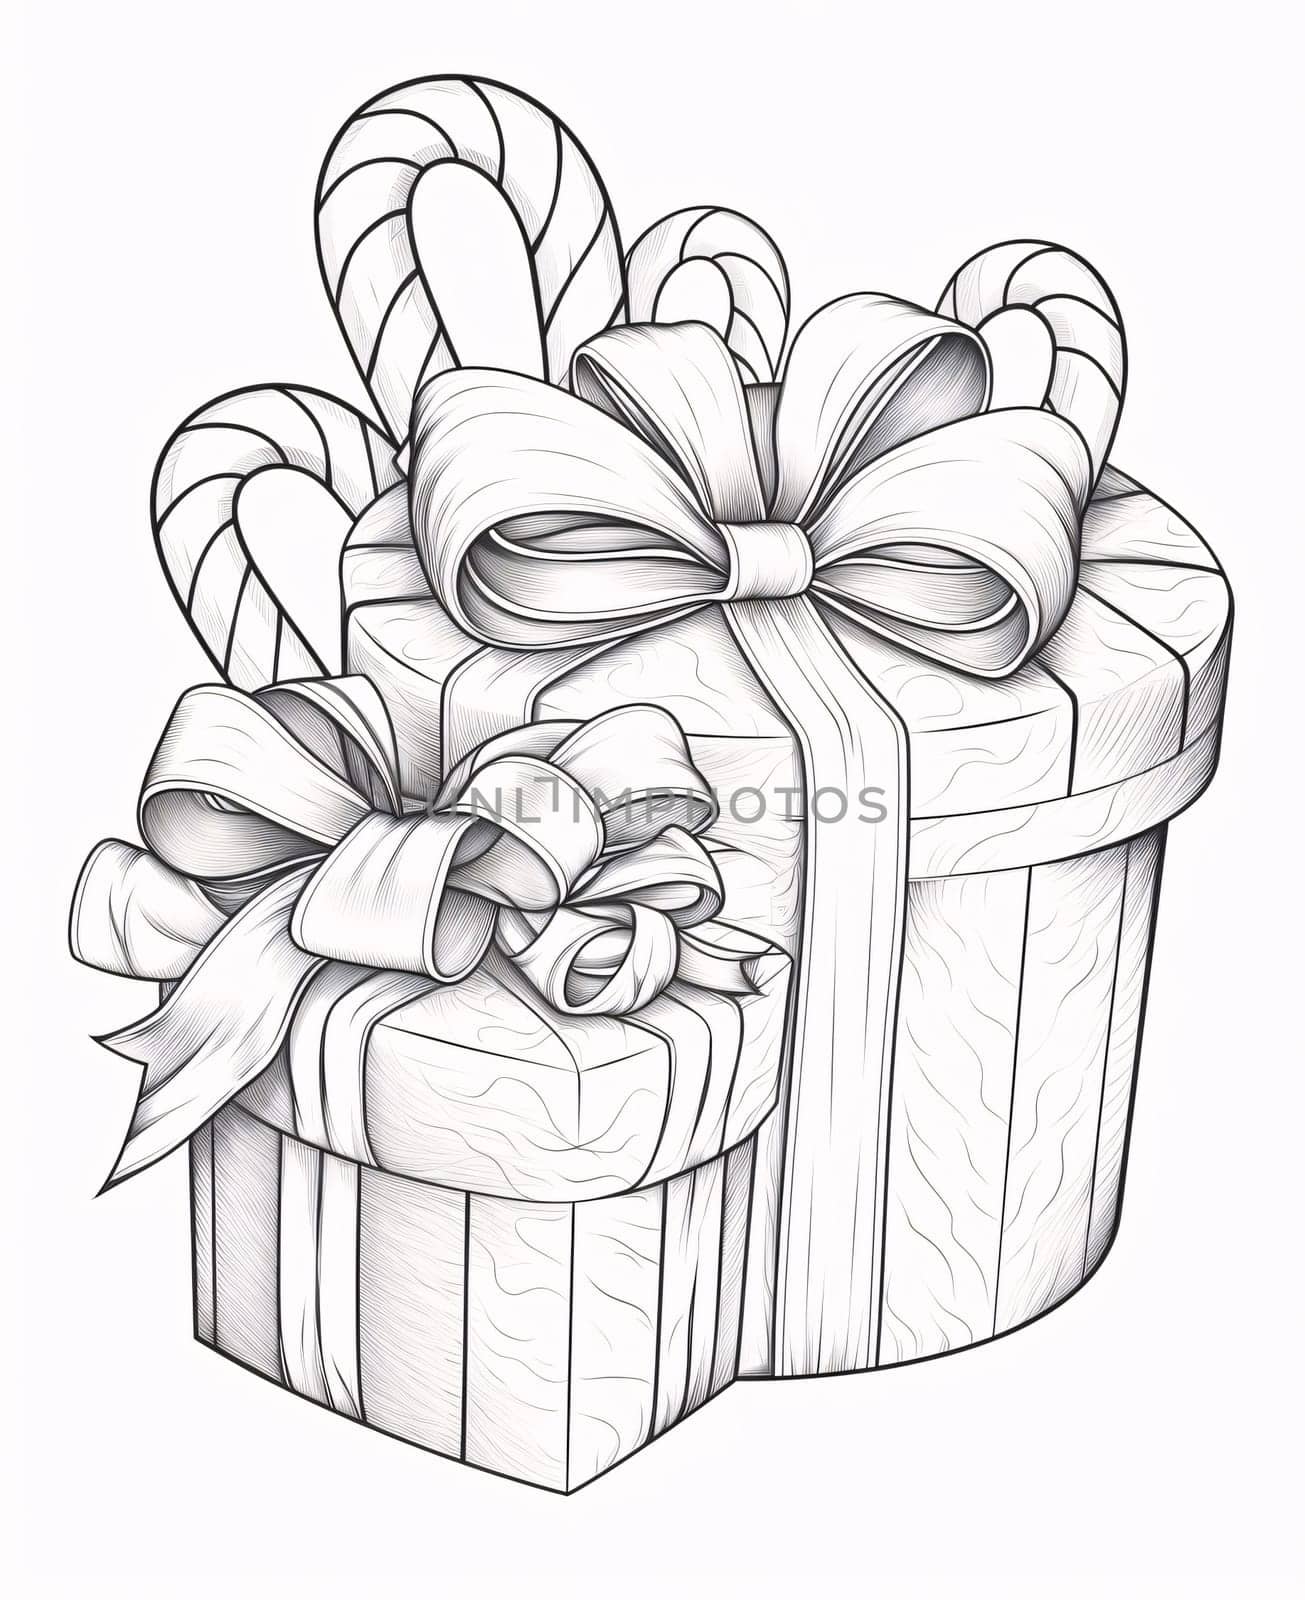 Black and white coloring card: gifts with bows and sticks. Gifts as a day symbol of present and love. by ThemesS